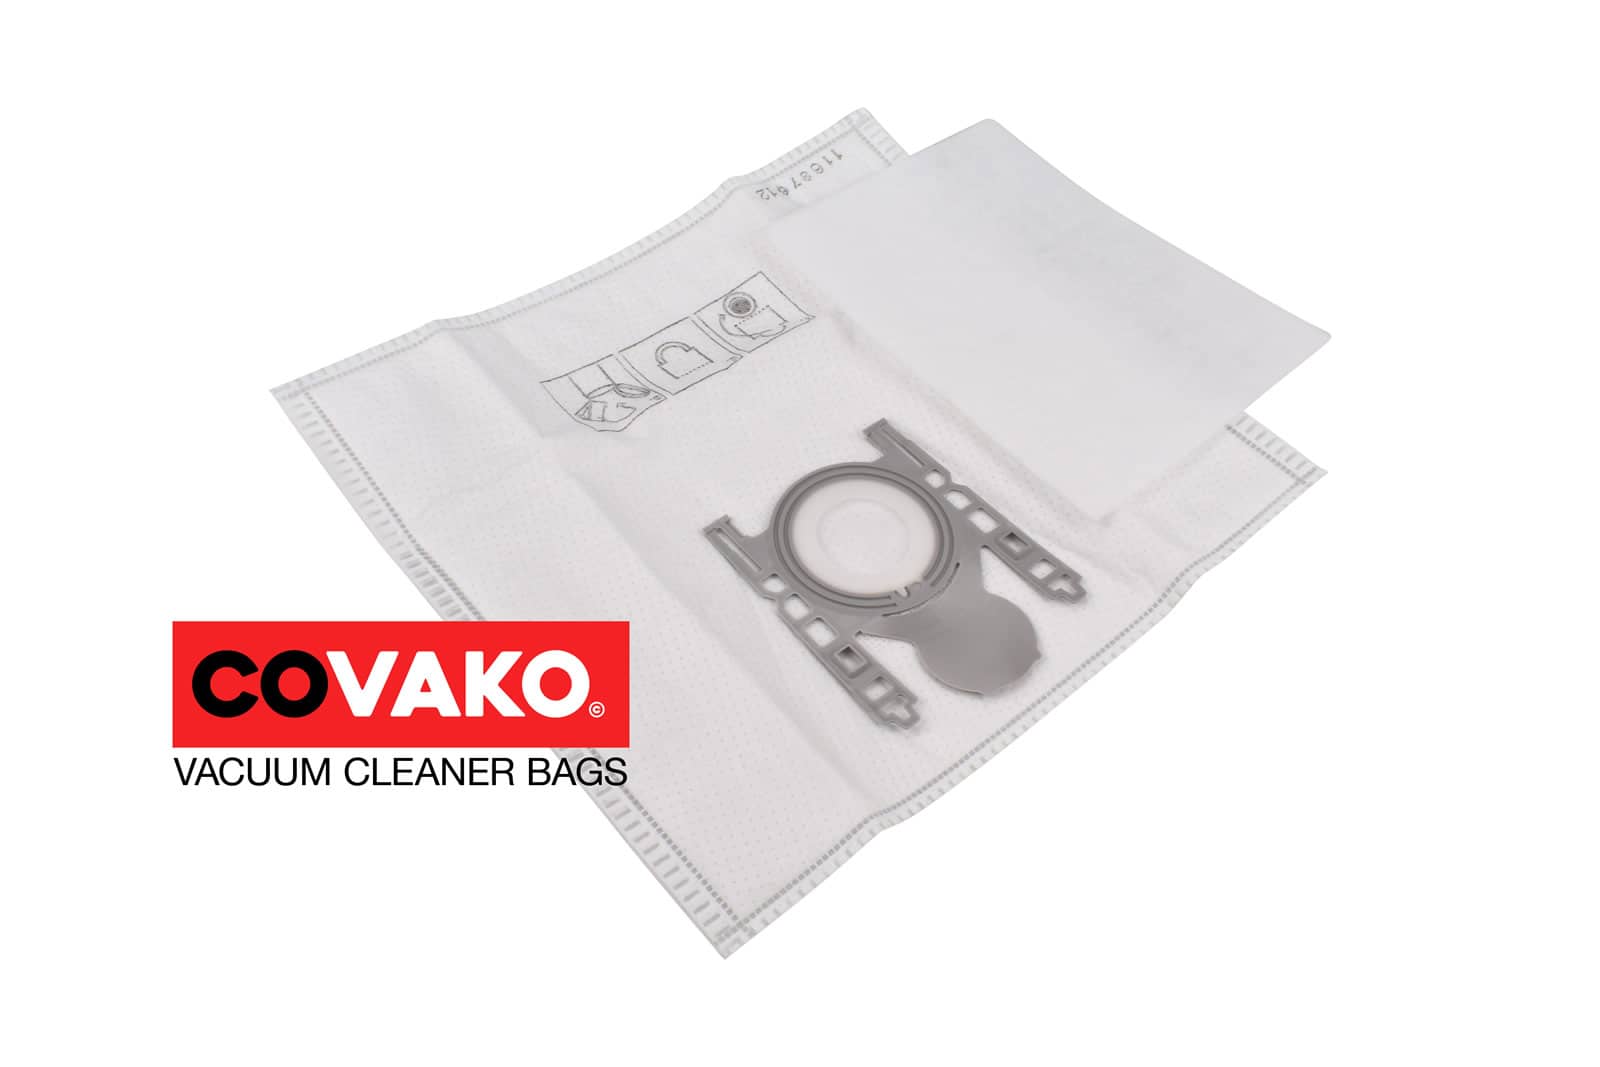 Bosch BBS 1000-1199 / Synthesis - Bosch vacuum cleaner bags